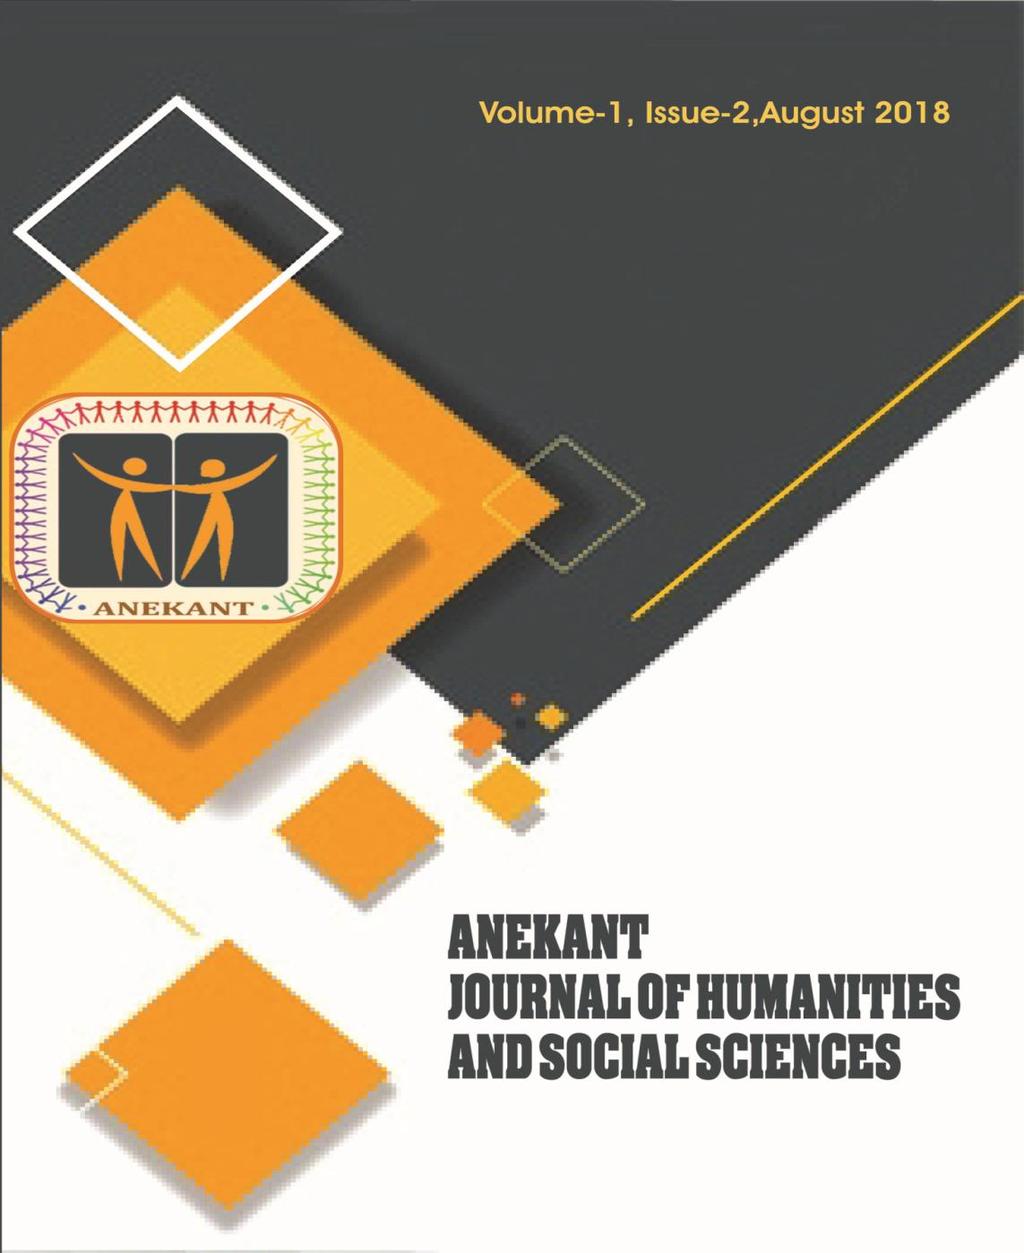 Anekant Journal of Humanities and Social